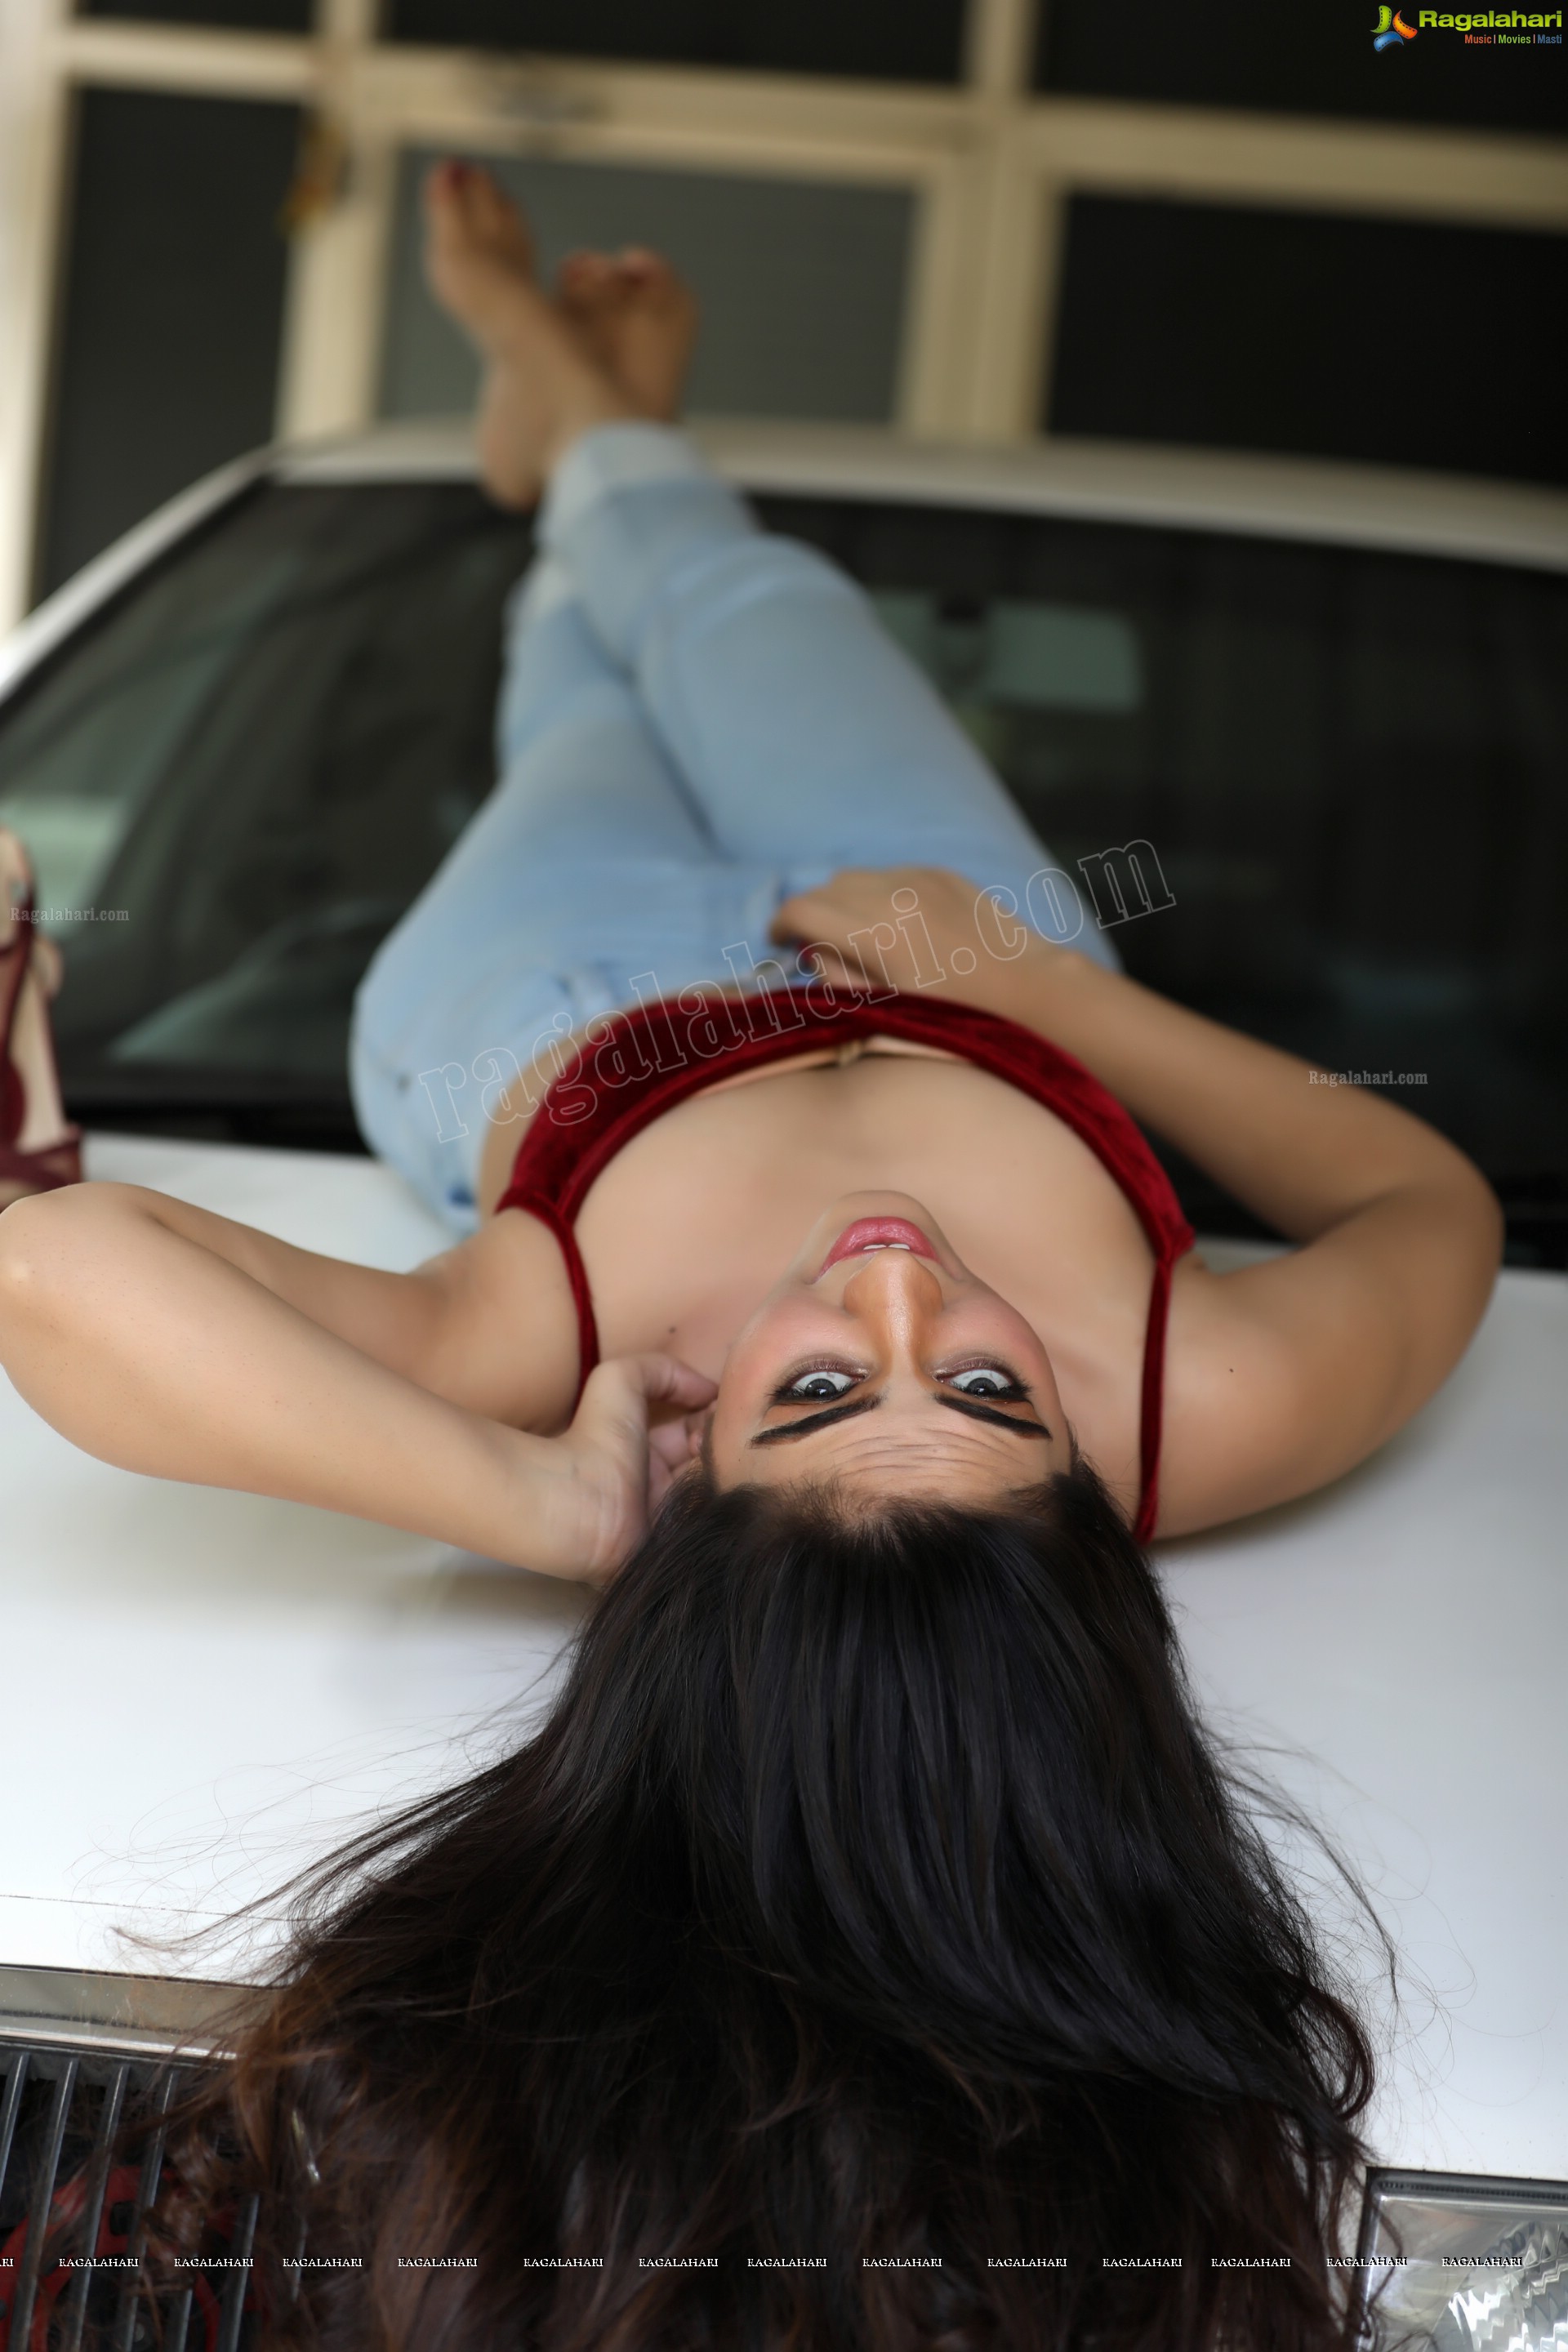 Harshita Panwar in Red Velvet Crop Top and Jeans, Exclusive Photo Shoot